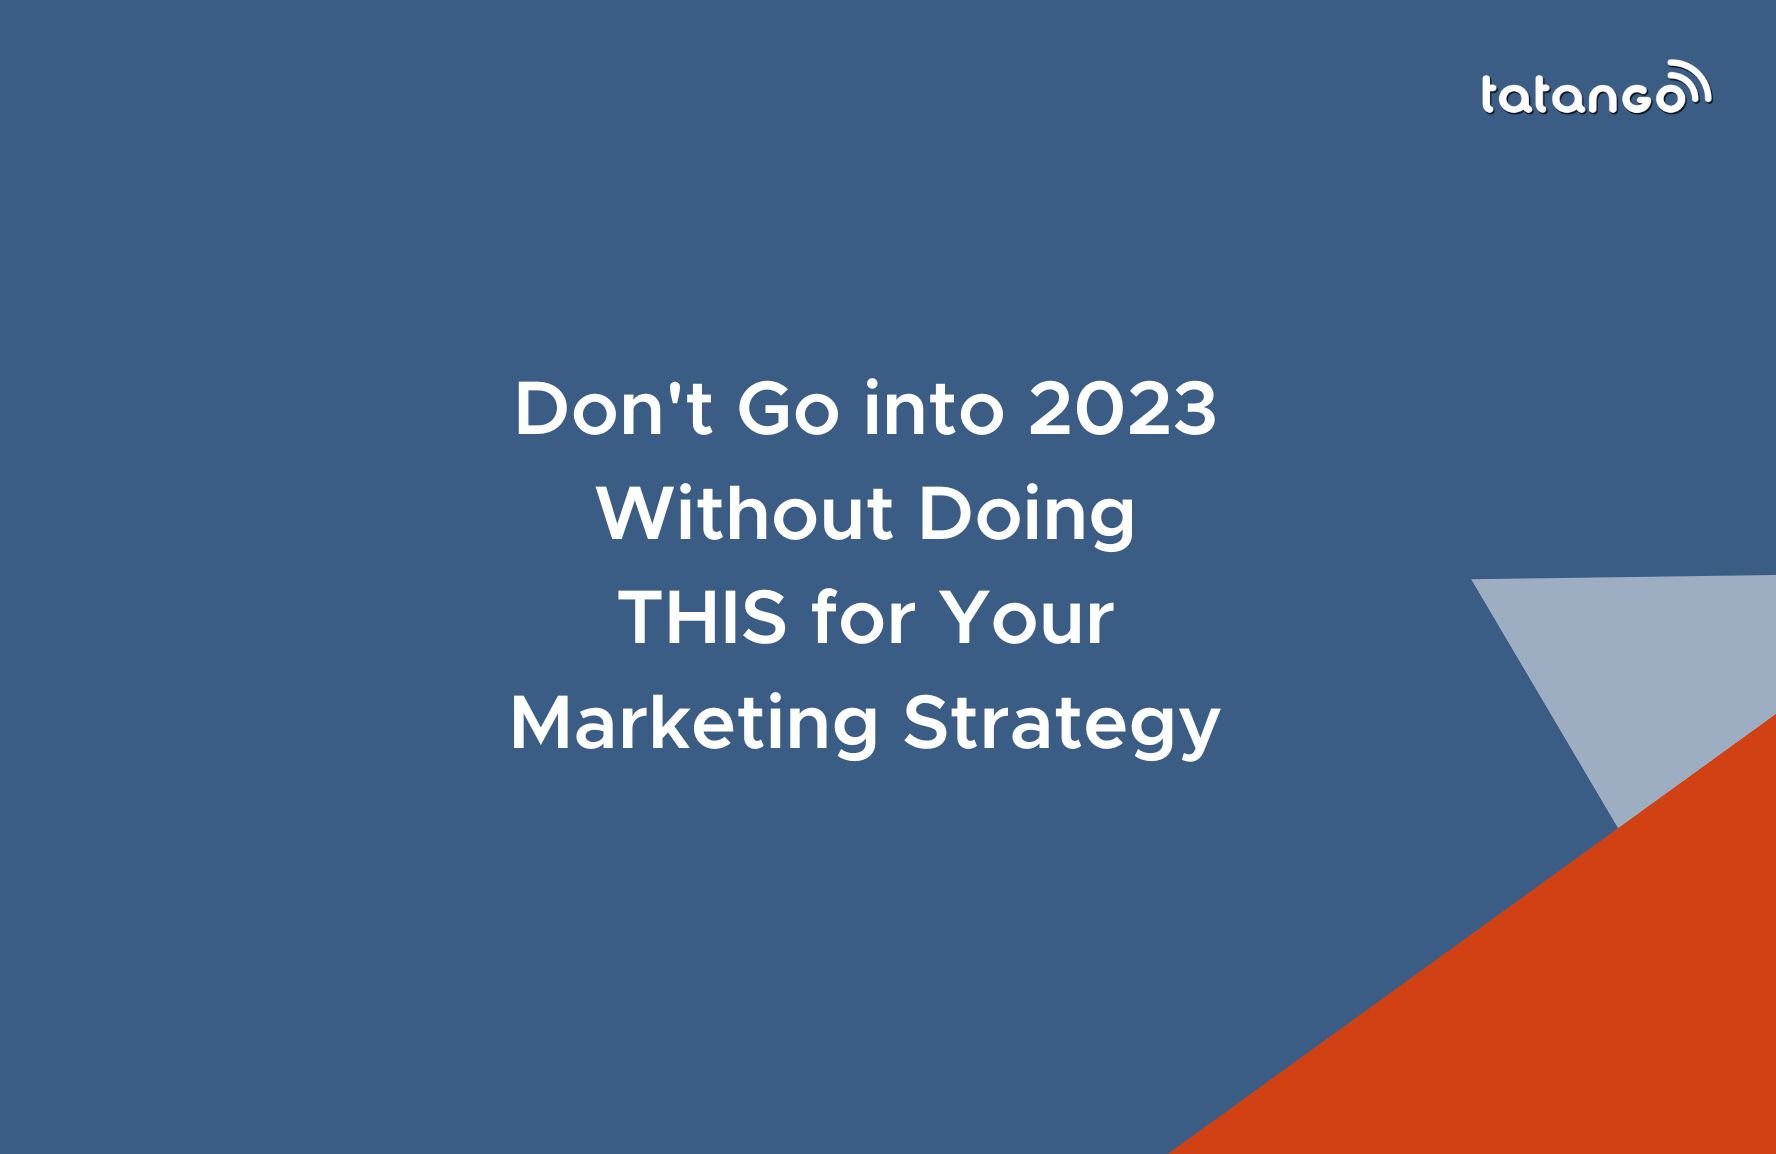 Don't Go into 2023 Without Doing THIS for Your Marketing Strategy